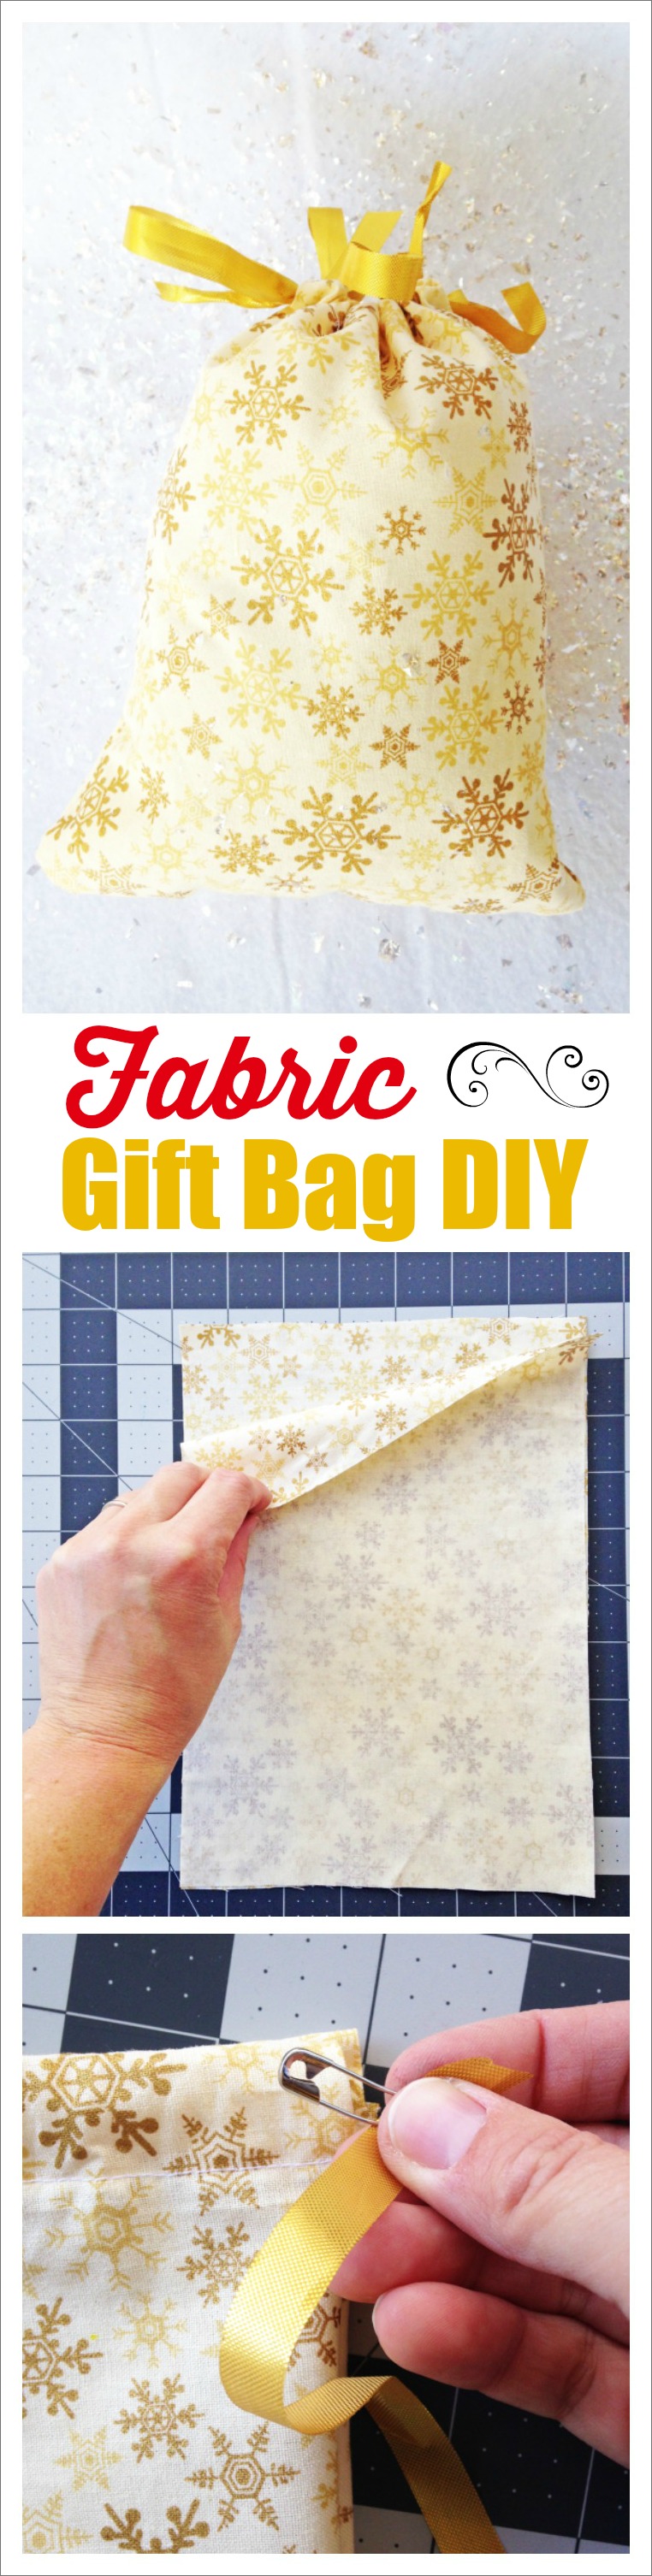 ... Ella and Annie Magazine , is showing us a fabric gift bag DIY today